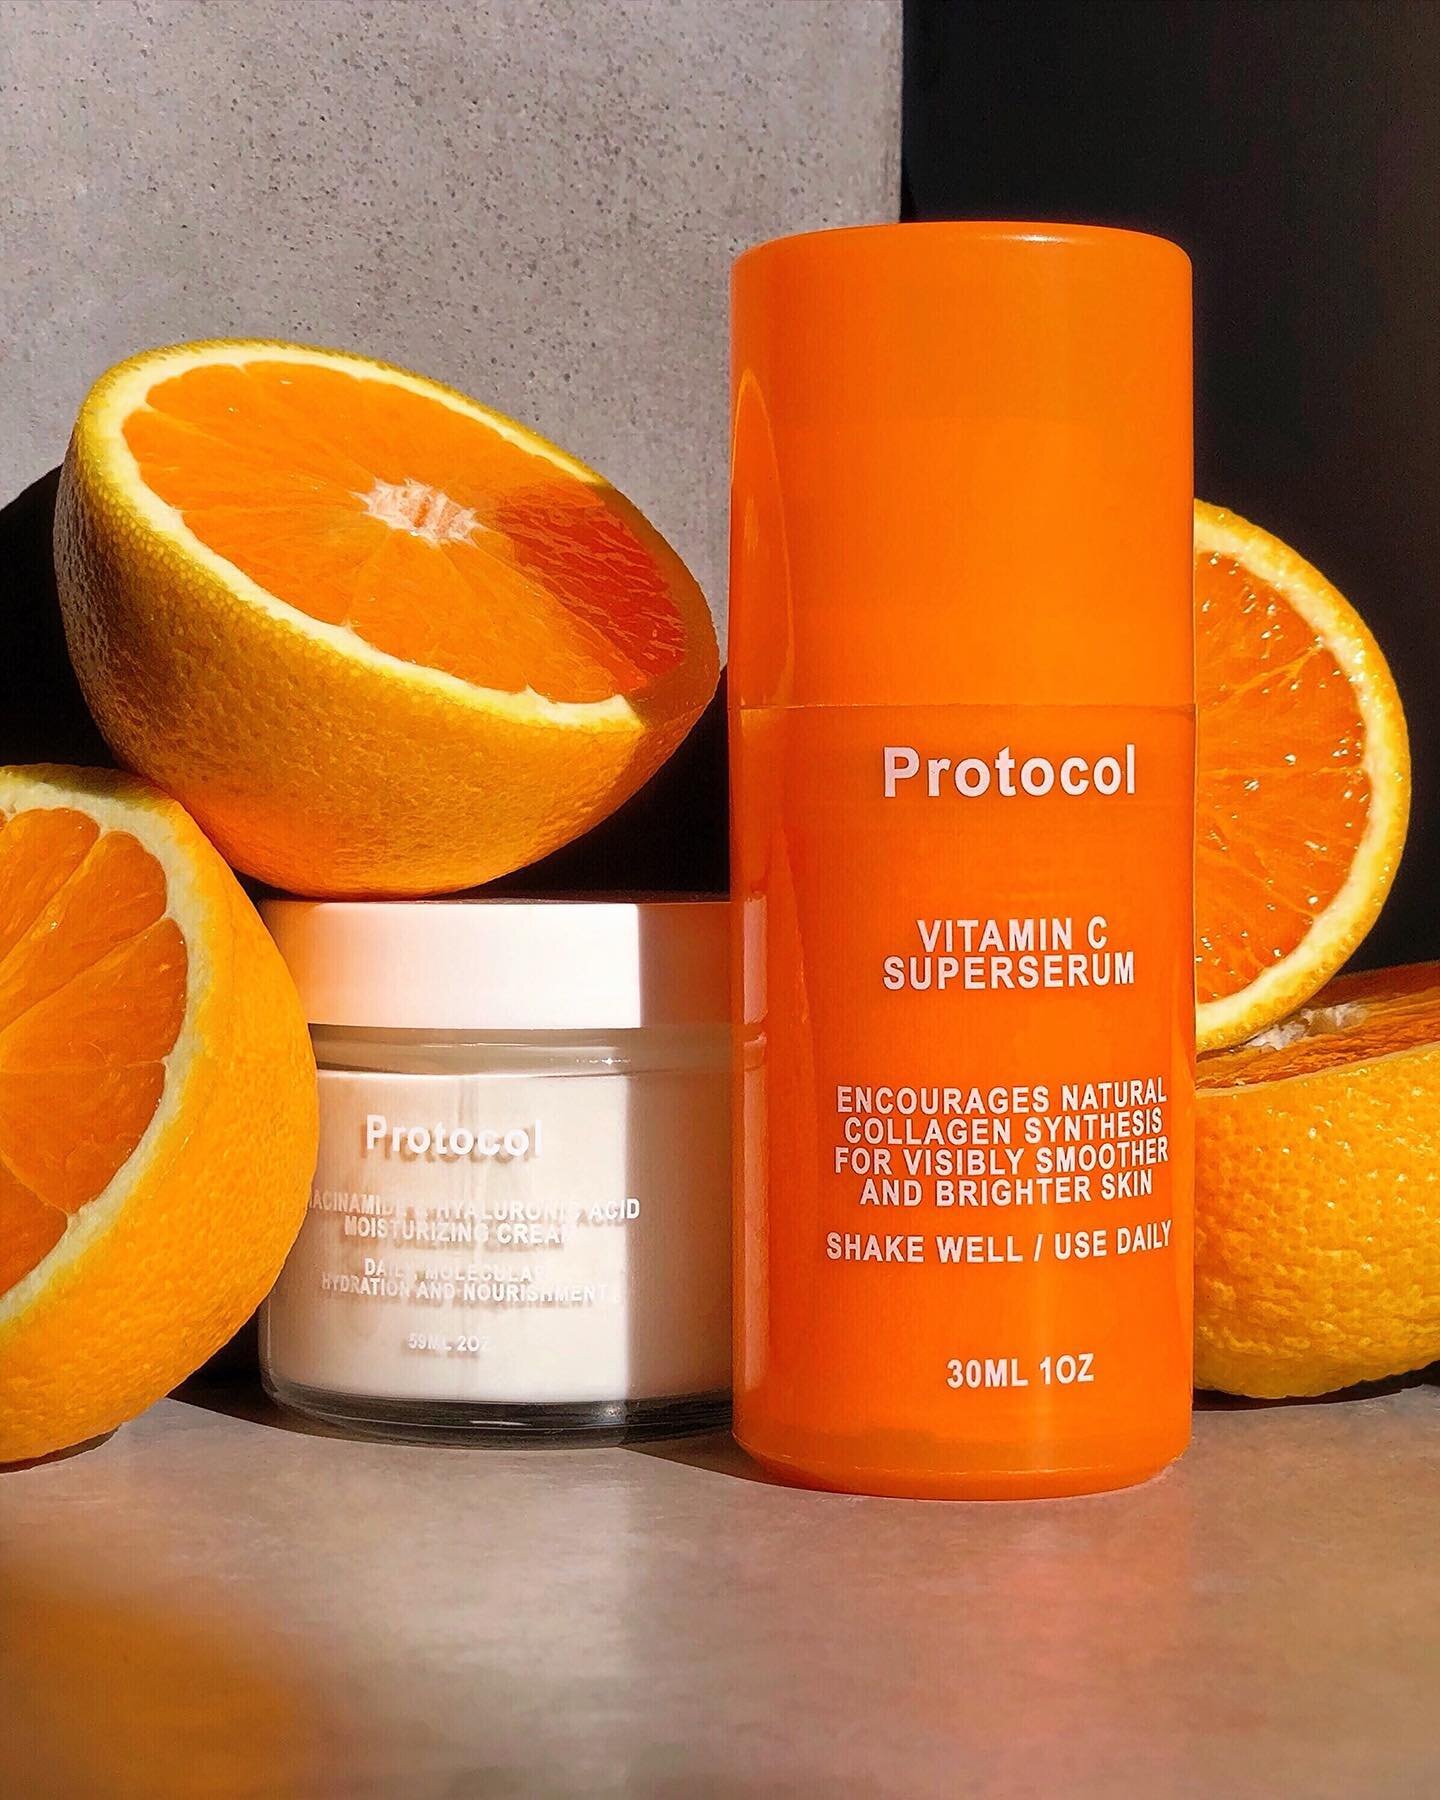 Just a few @protocolskincare products #ProtocolLabGiftedMe that I have been loving 🍊
&mdash;&mdash;&mdash;&mdash;&mdash;&mdash;&mdash;&mdash;&mdash;&mdash;&mdash;&mdash;&mdash;&mdash;&mdash;&mdash;&mdash;&mdash;&mdash;&mdash;&mdash;&mdash;&mdash;
#p